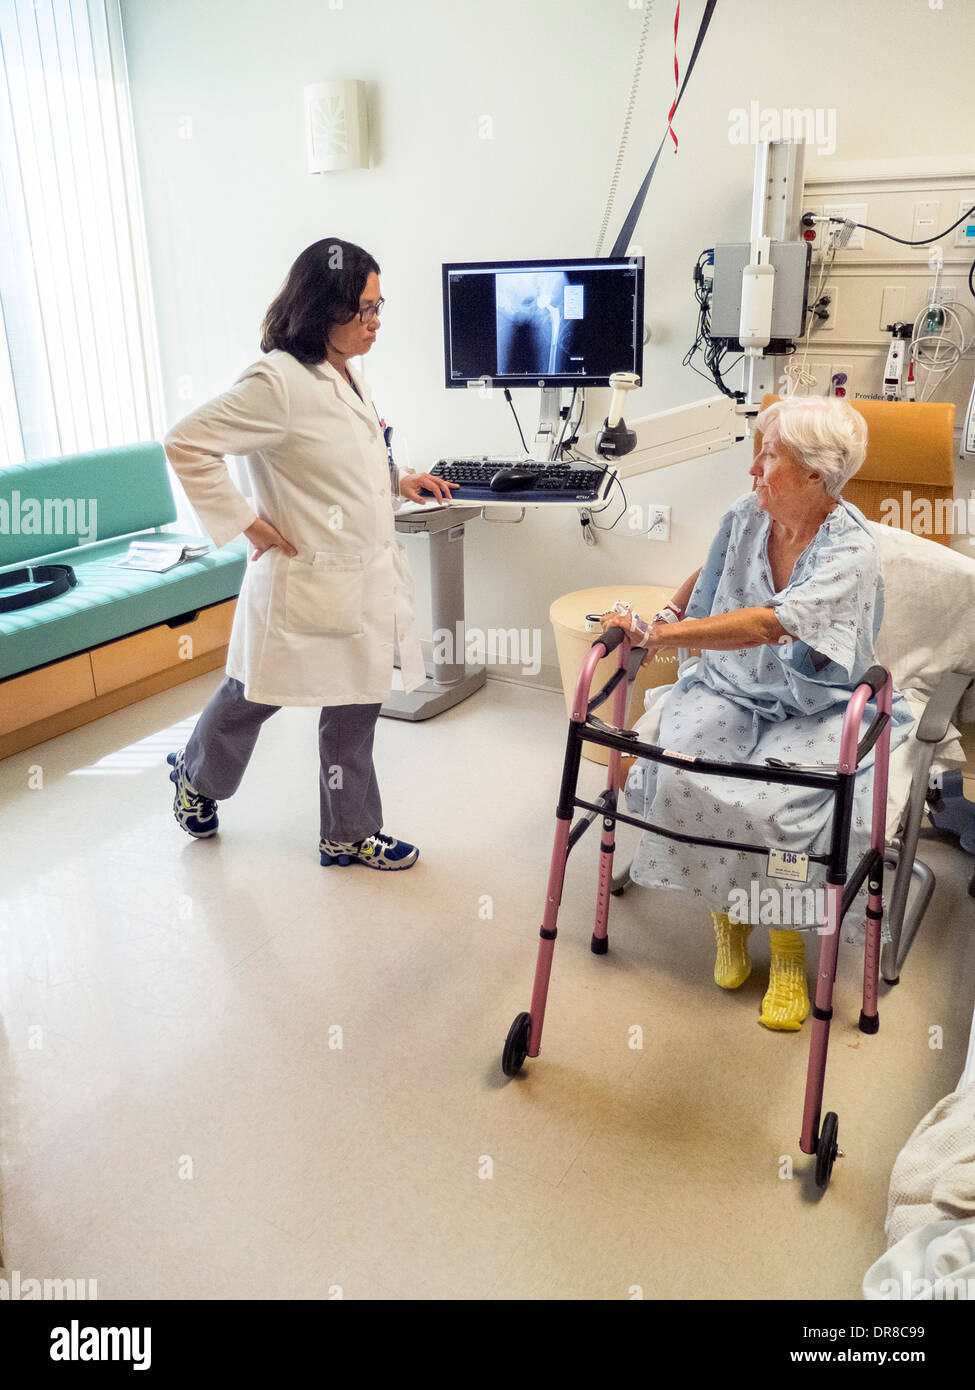 n occupational therapist demonstrates correct posture to a recovering hip replacement surgery patient at California hospital. Stock Photo